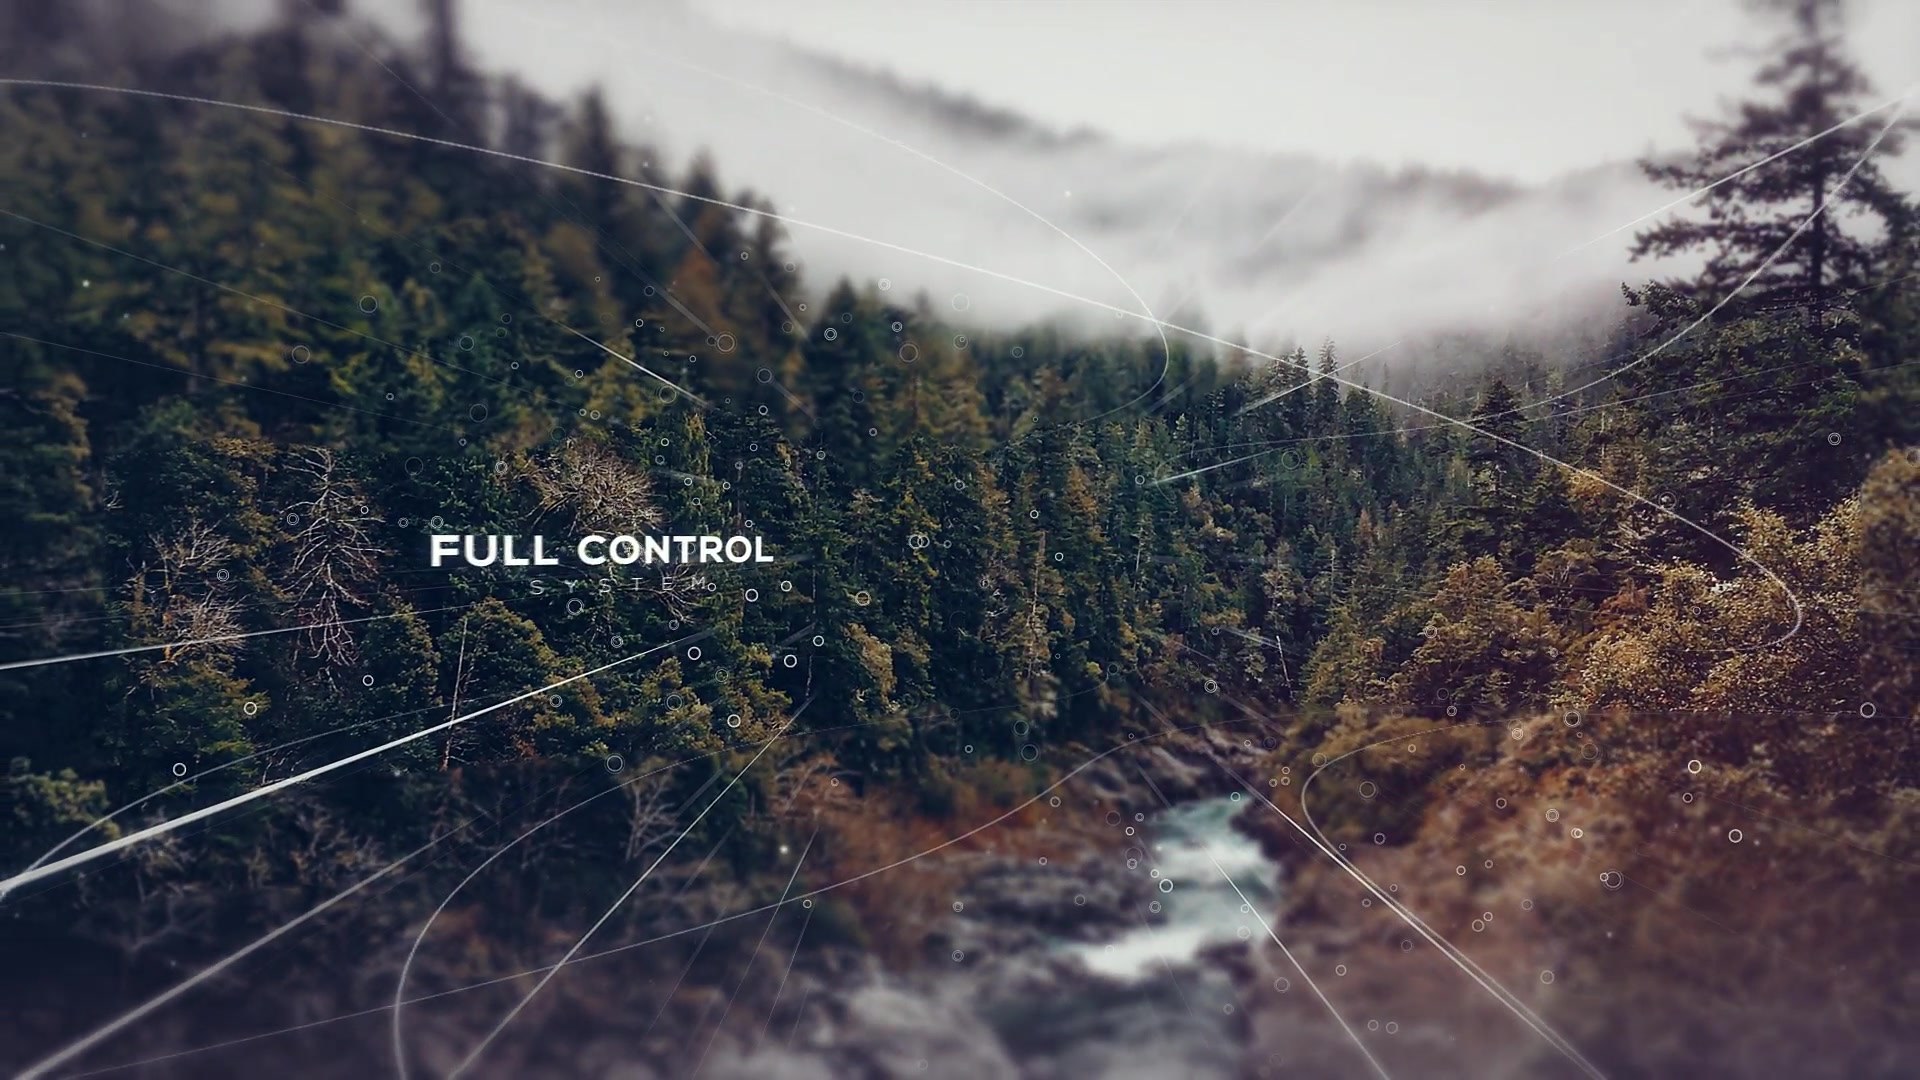 Lines Parallax Slideshow - Download Videohive 19209185